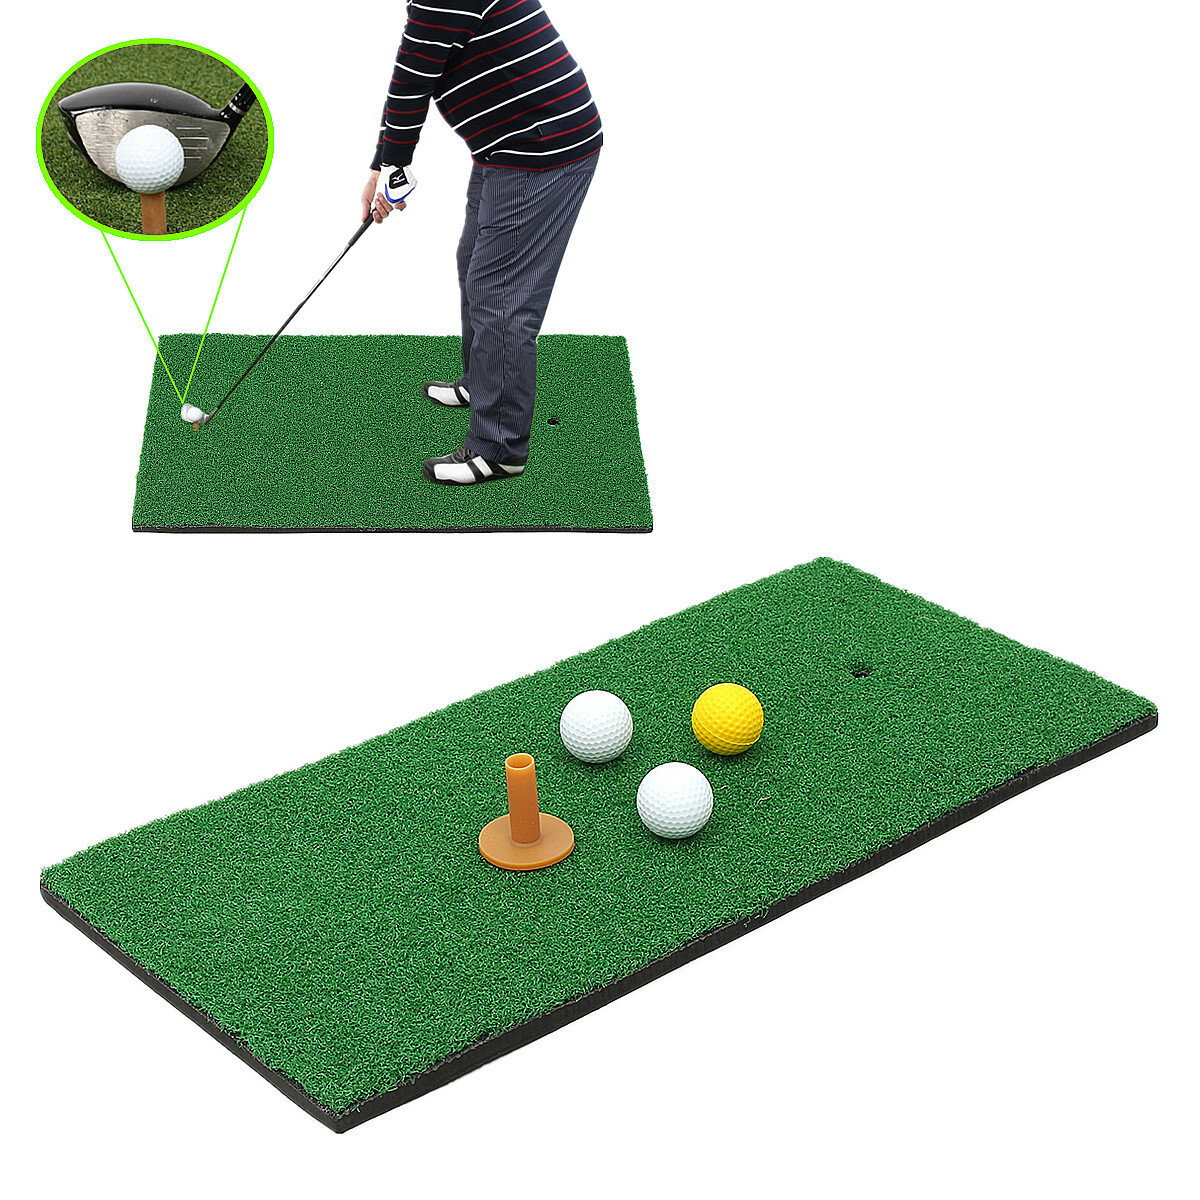 Image of Golf Putting Training Mats Nylon Turf Chipping Driving Practice Mat Indoor